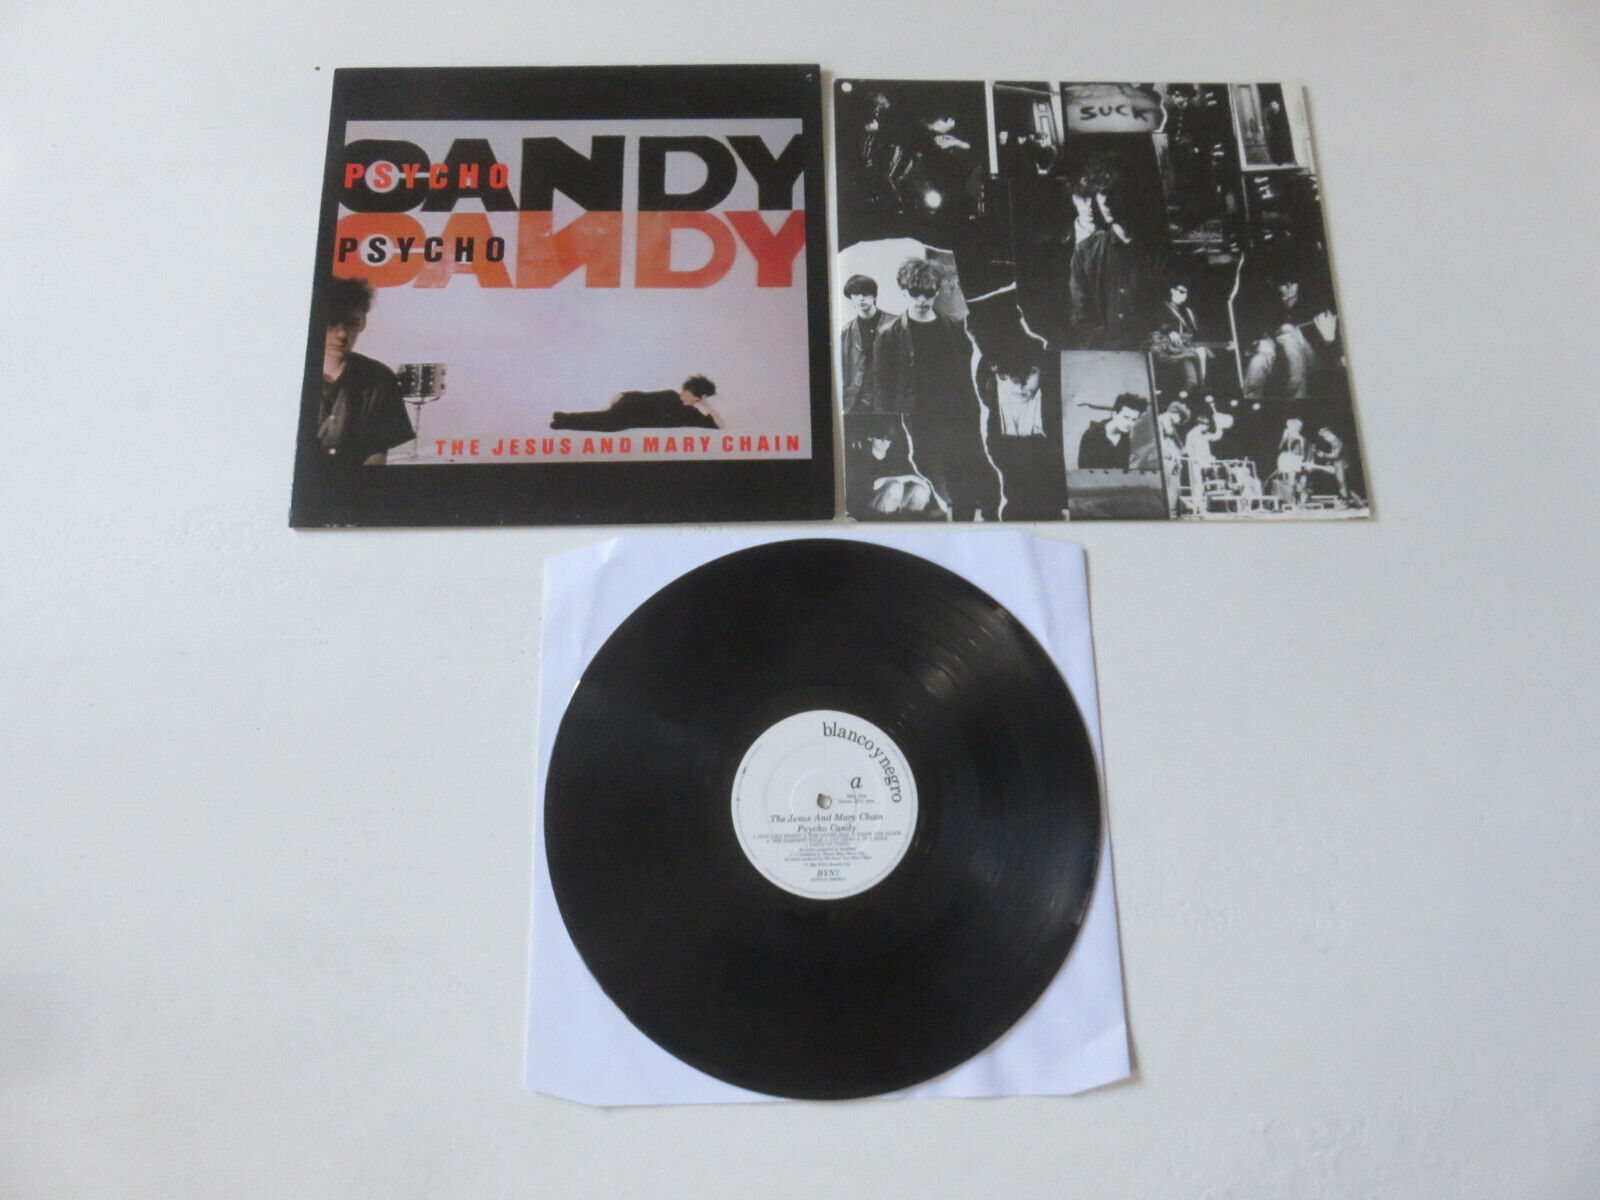 The+Jesus+and+Mary+Chain+Psychocandy+1985+WEA+Records+Vinyl+LP+